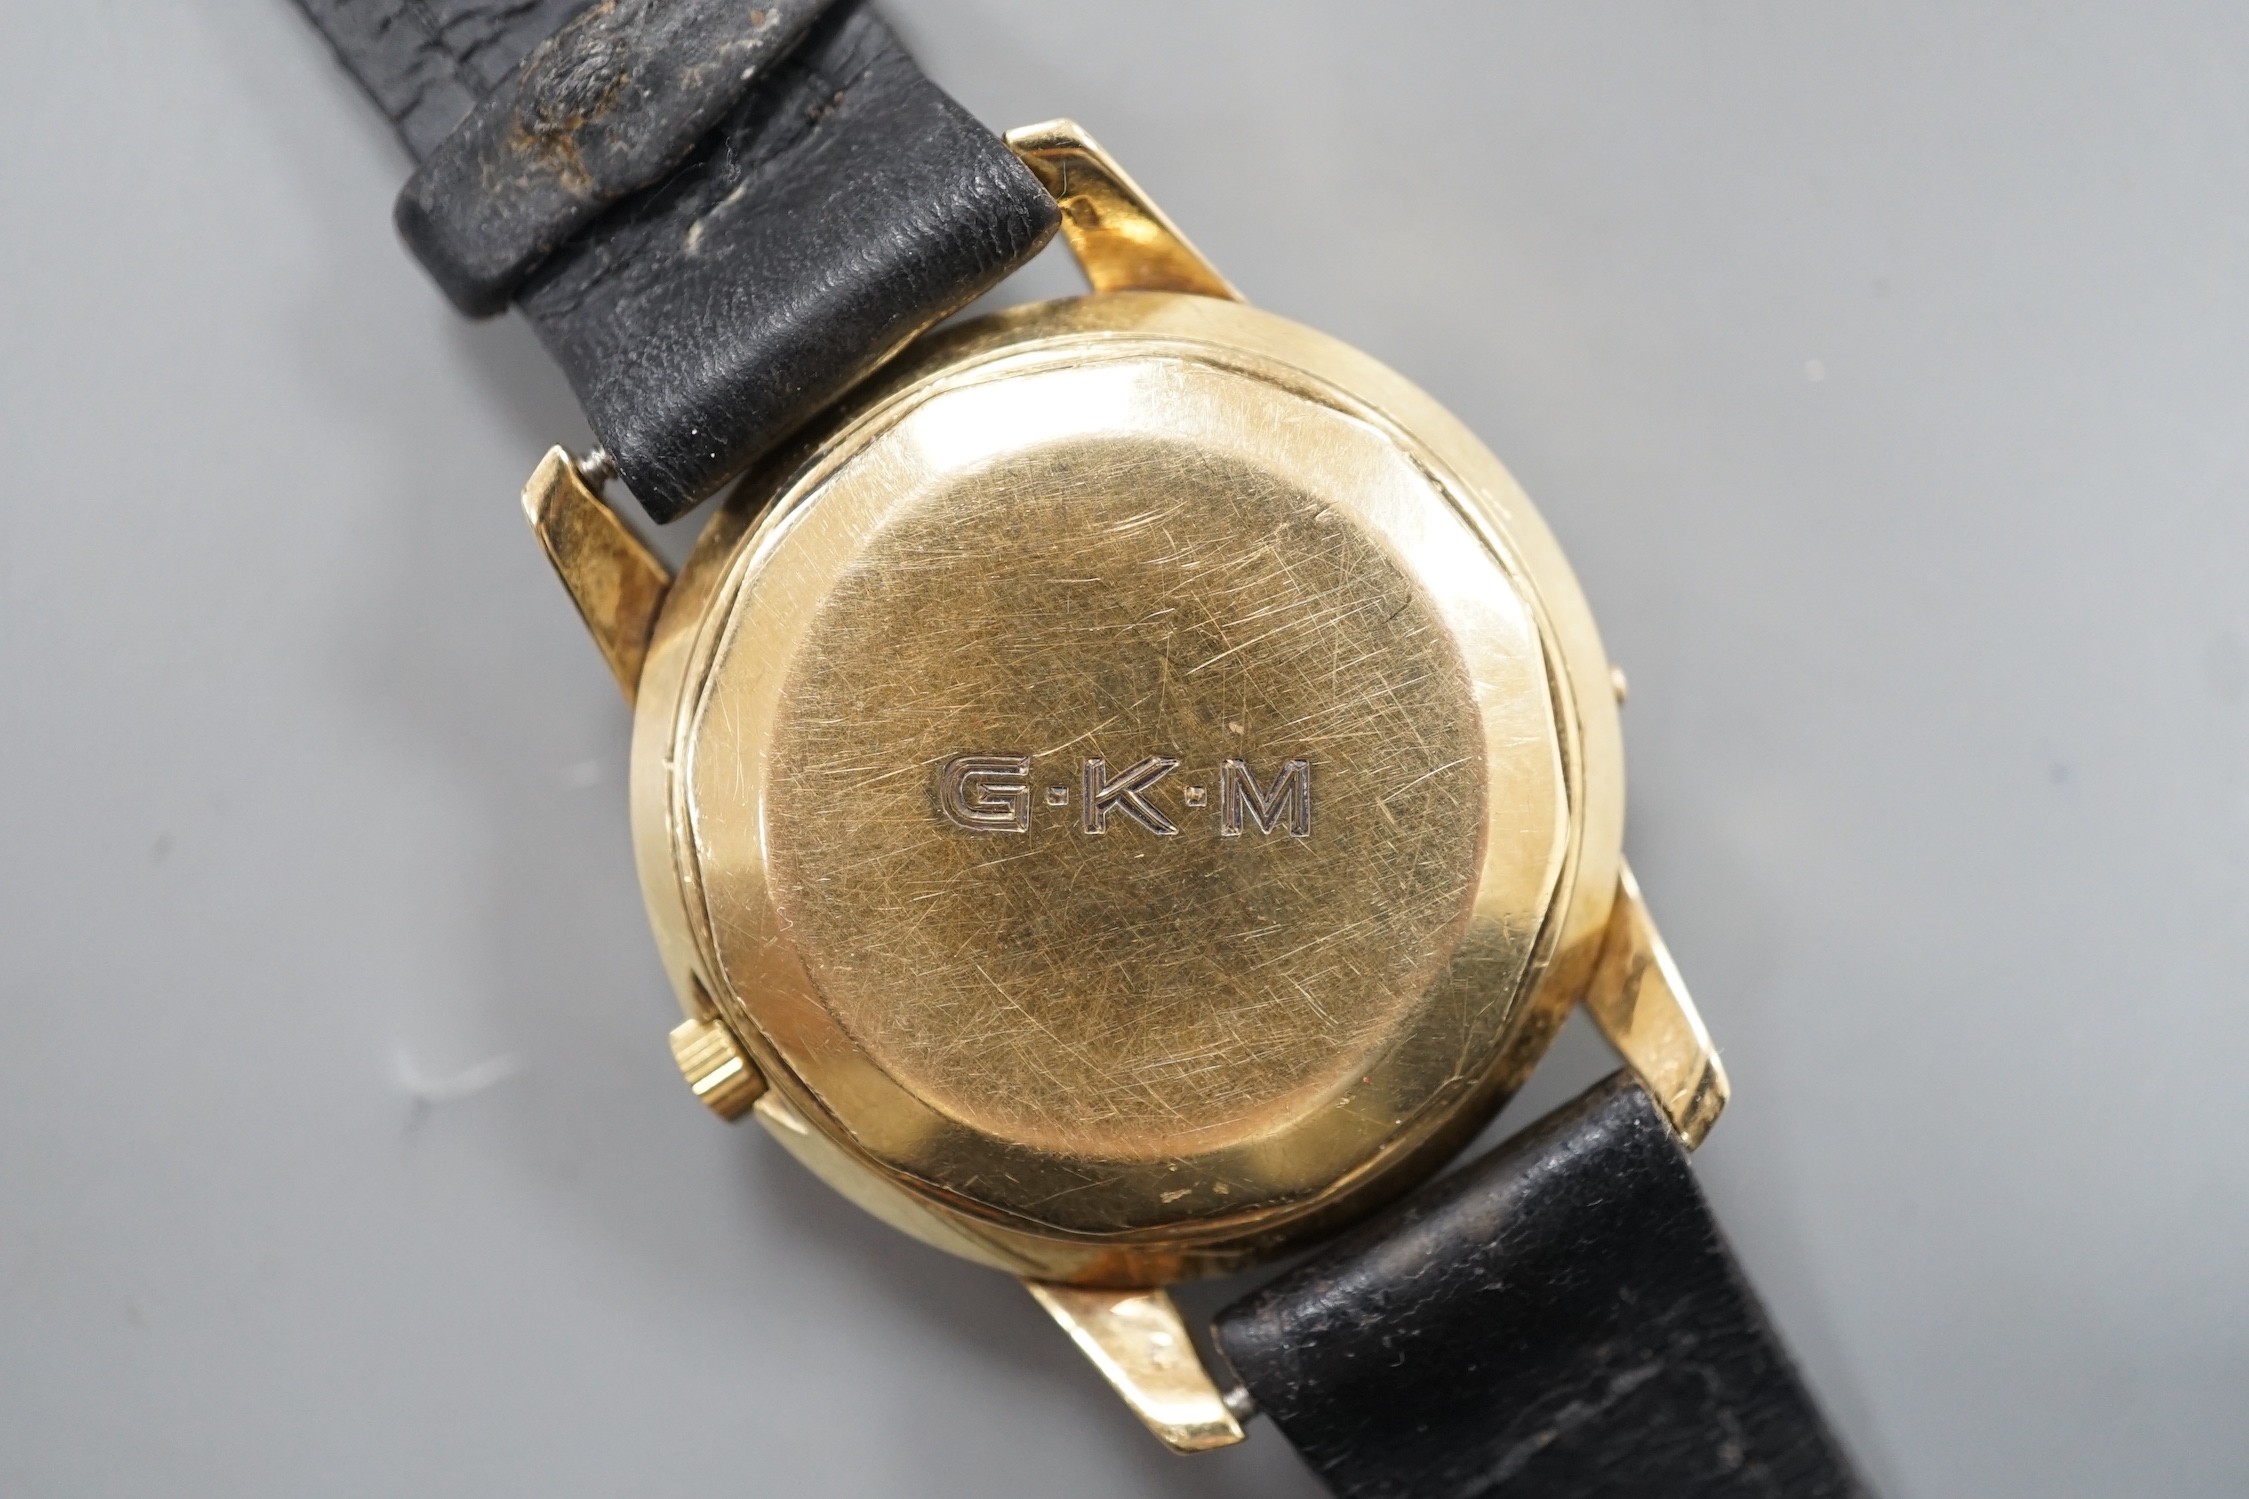 A gentleman's 14ct gold Gubelin Ipso Day automatic wrist watch, with baton numerals and date aperture, on associated leather strap, the case back with engraved initials, case diameter 35mm